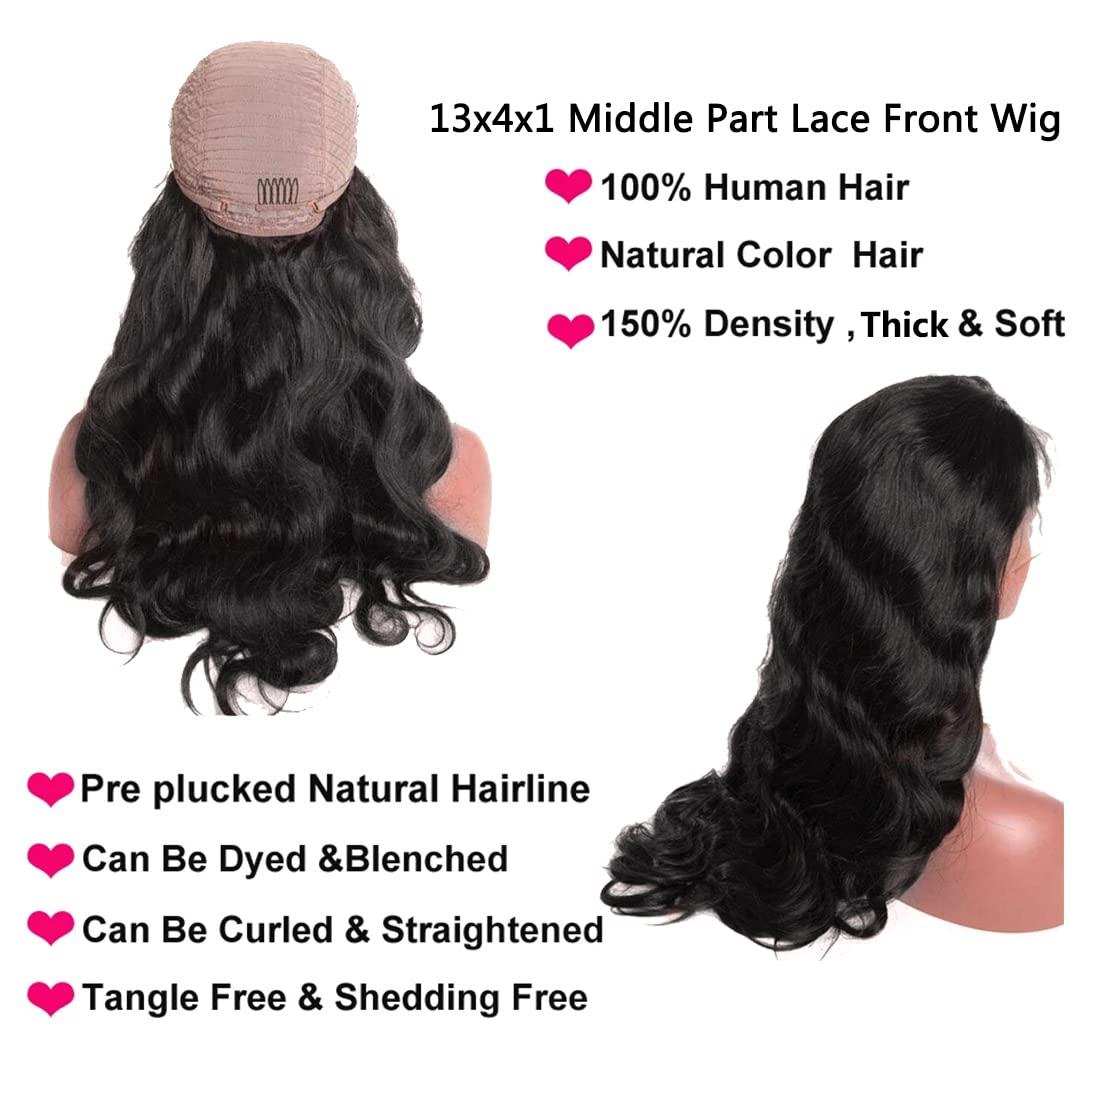 13x4X1 Lace Front Human Hair Wig Body Wave Middle Part Wigs for Black Women  T Part Wigs Virgin Hair Body Wavy Medium Part Glueless Lace Frontal Wigs  150 Density Frontal Wig Ear